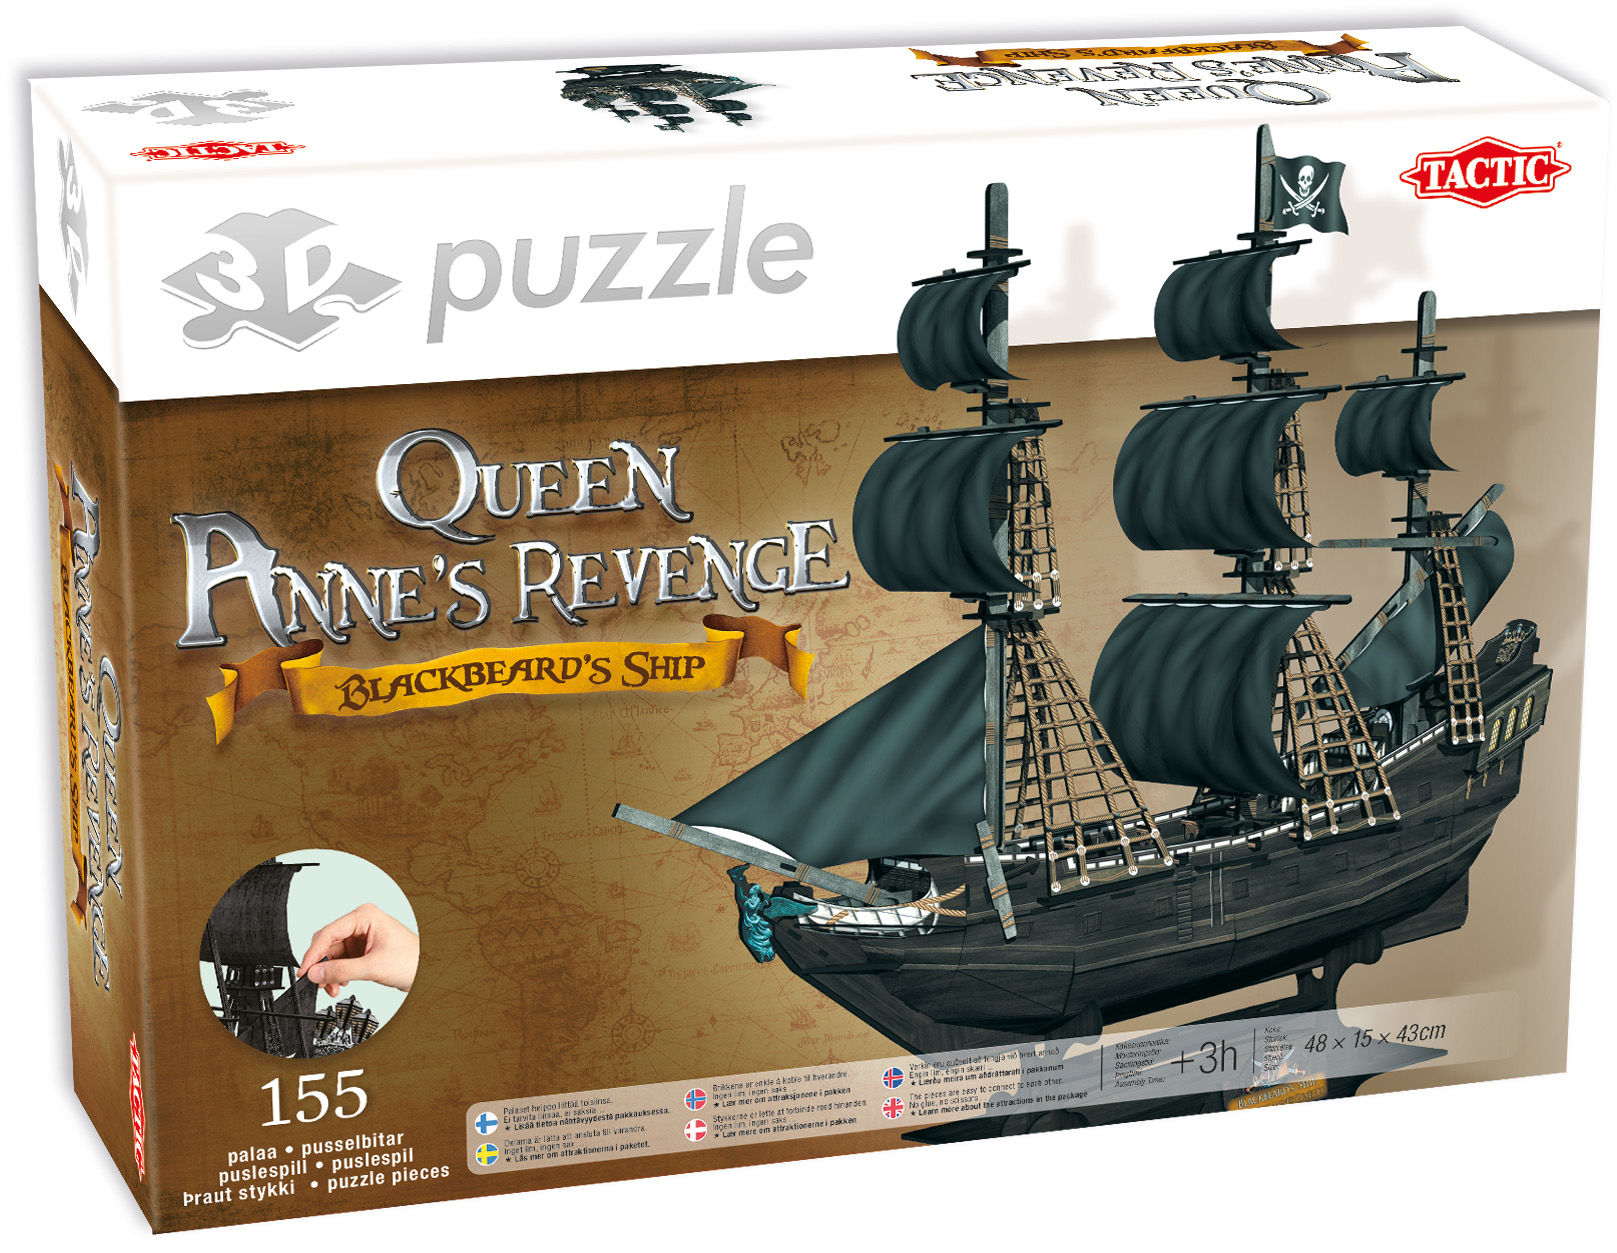 Tactic Puslespill 3D Puzzle The Queen Anne”‘s Revenge - BEST I TEST 2023